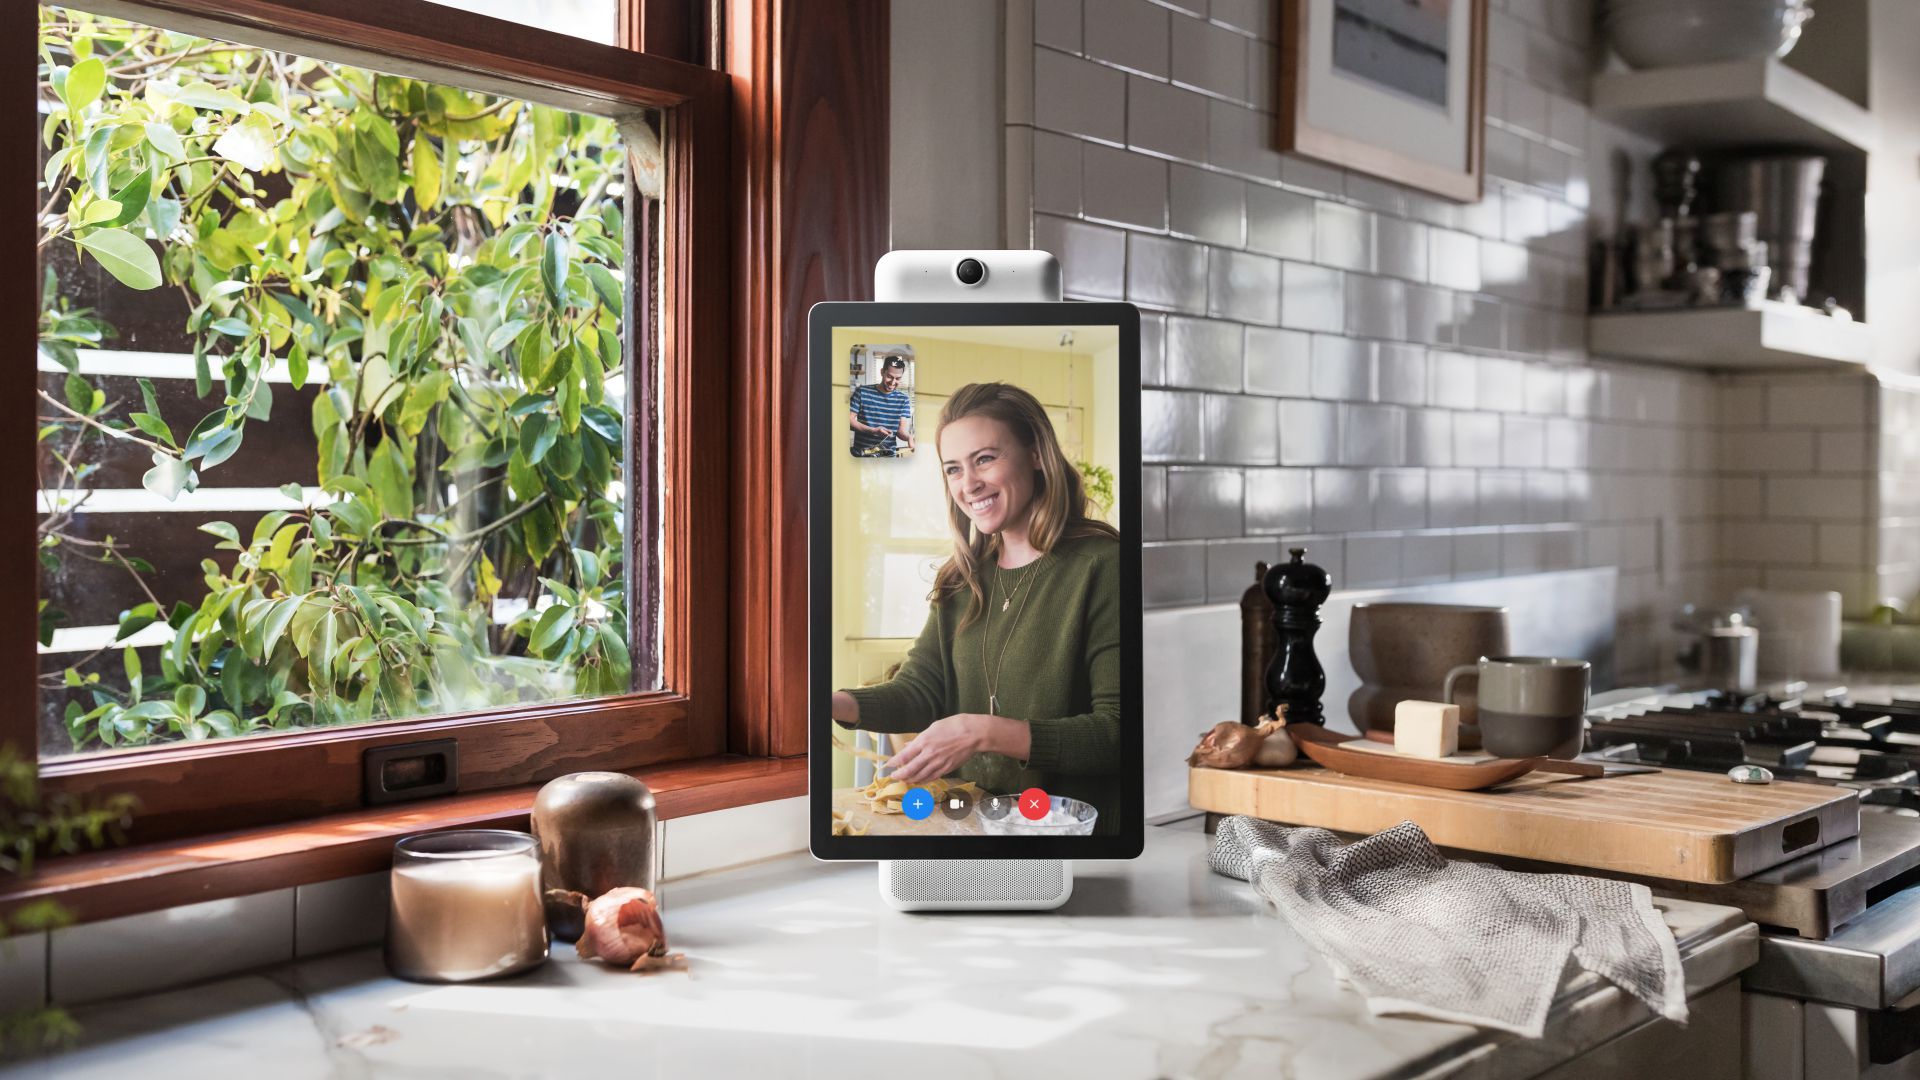 Facebook's Portal video chat device.